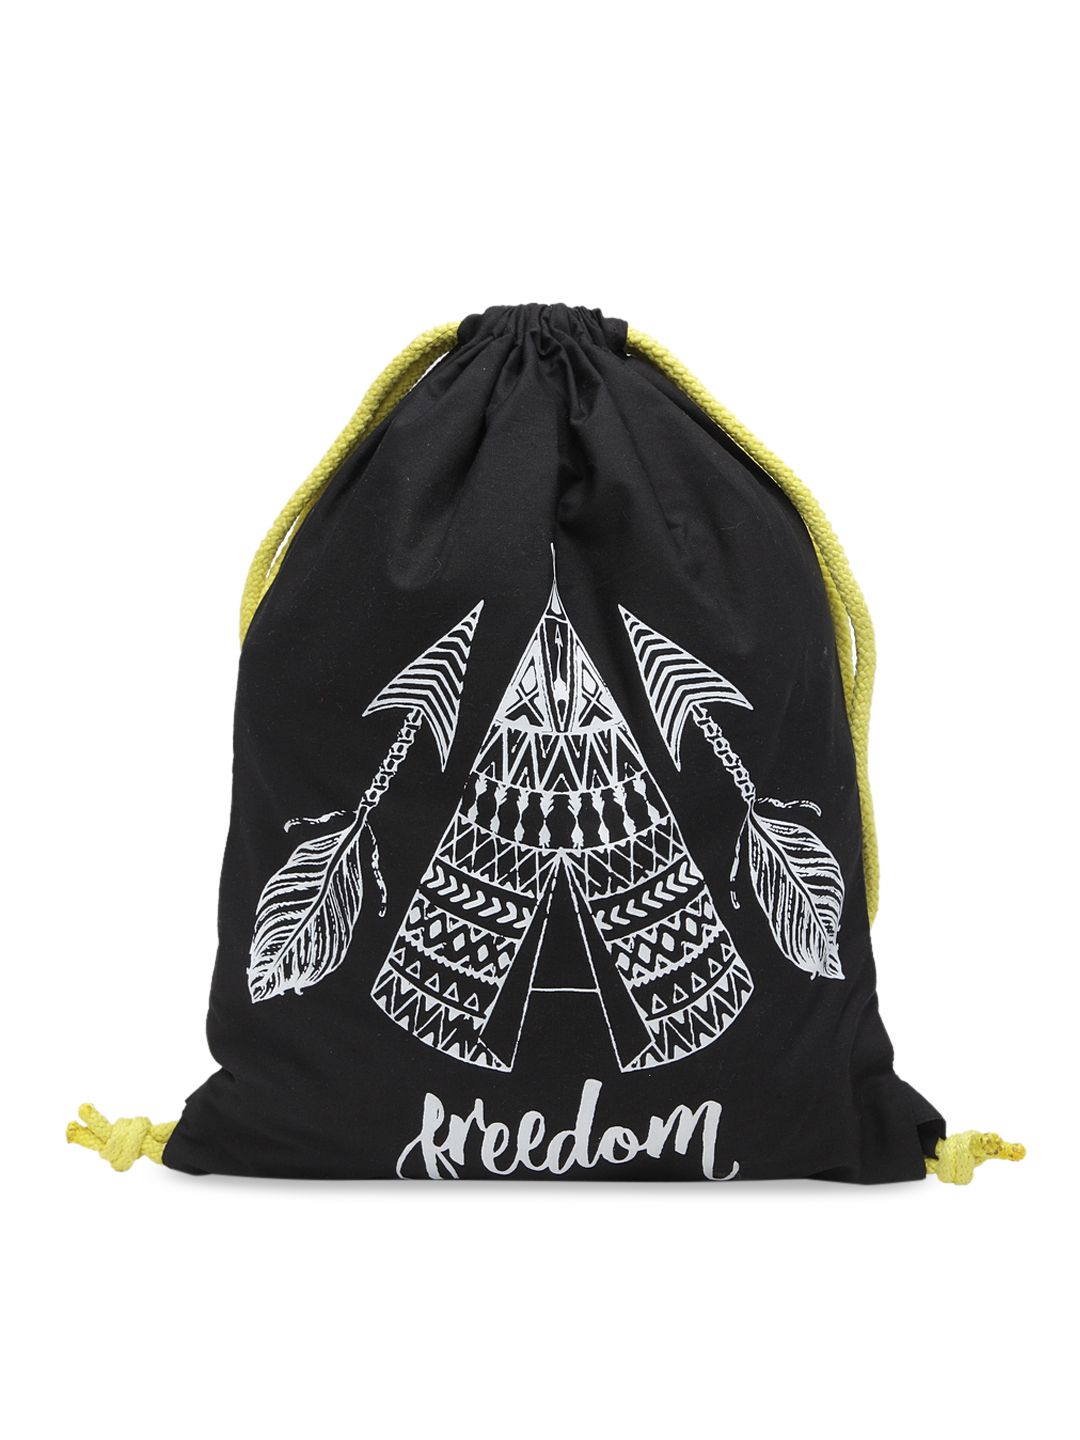 The House of Tara Unisex Black & White Graphic Backpack Price in India